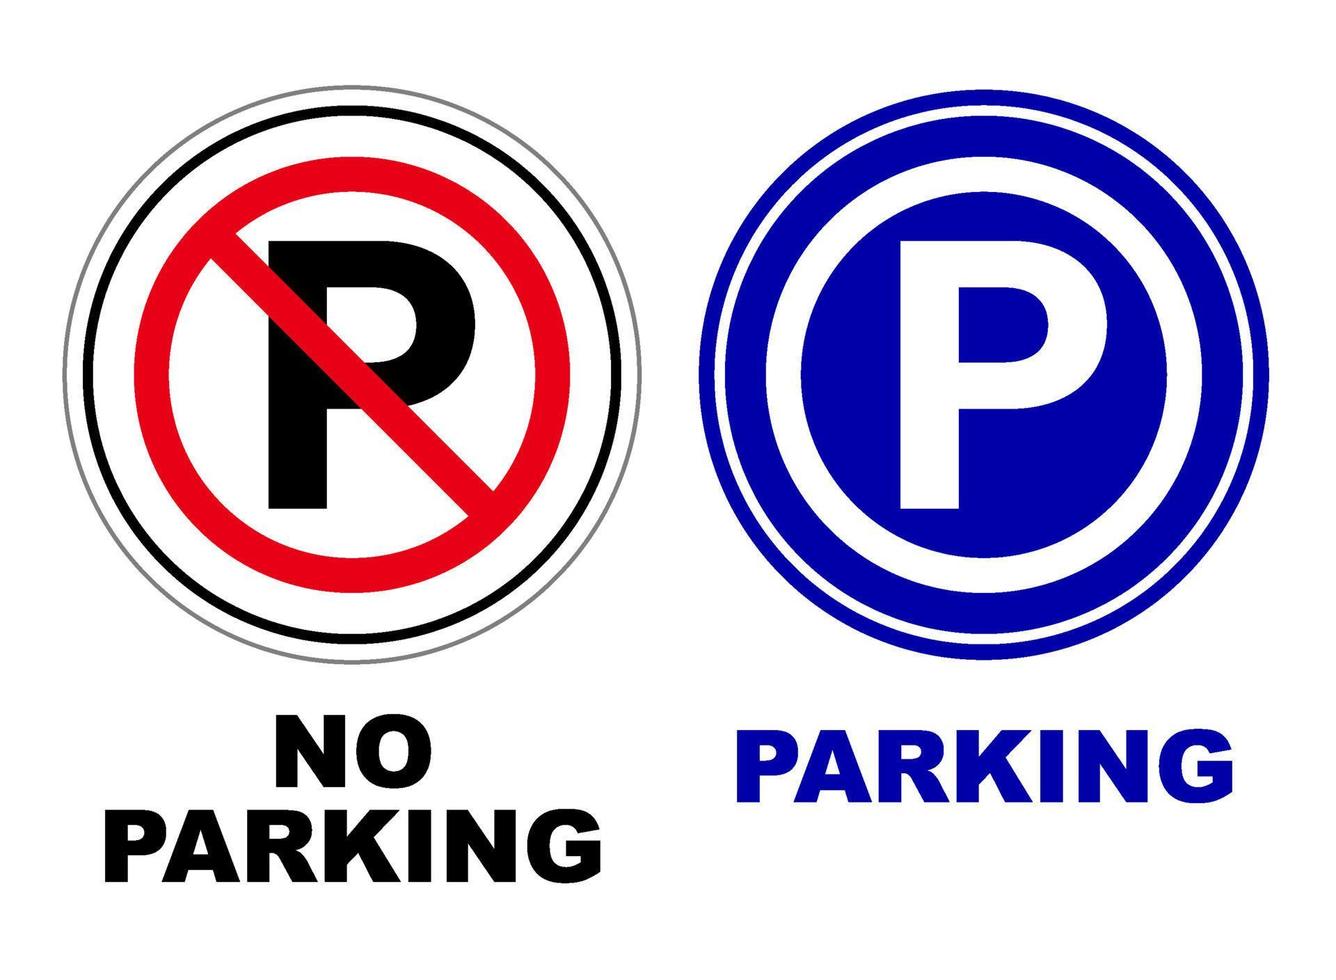 parking prohibited sign set bundle printable rounded template flat design isolated public sign vector